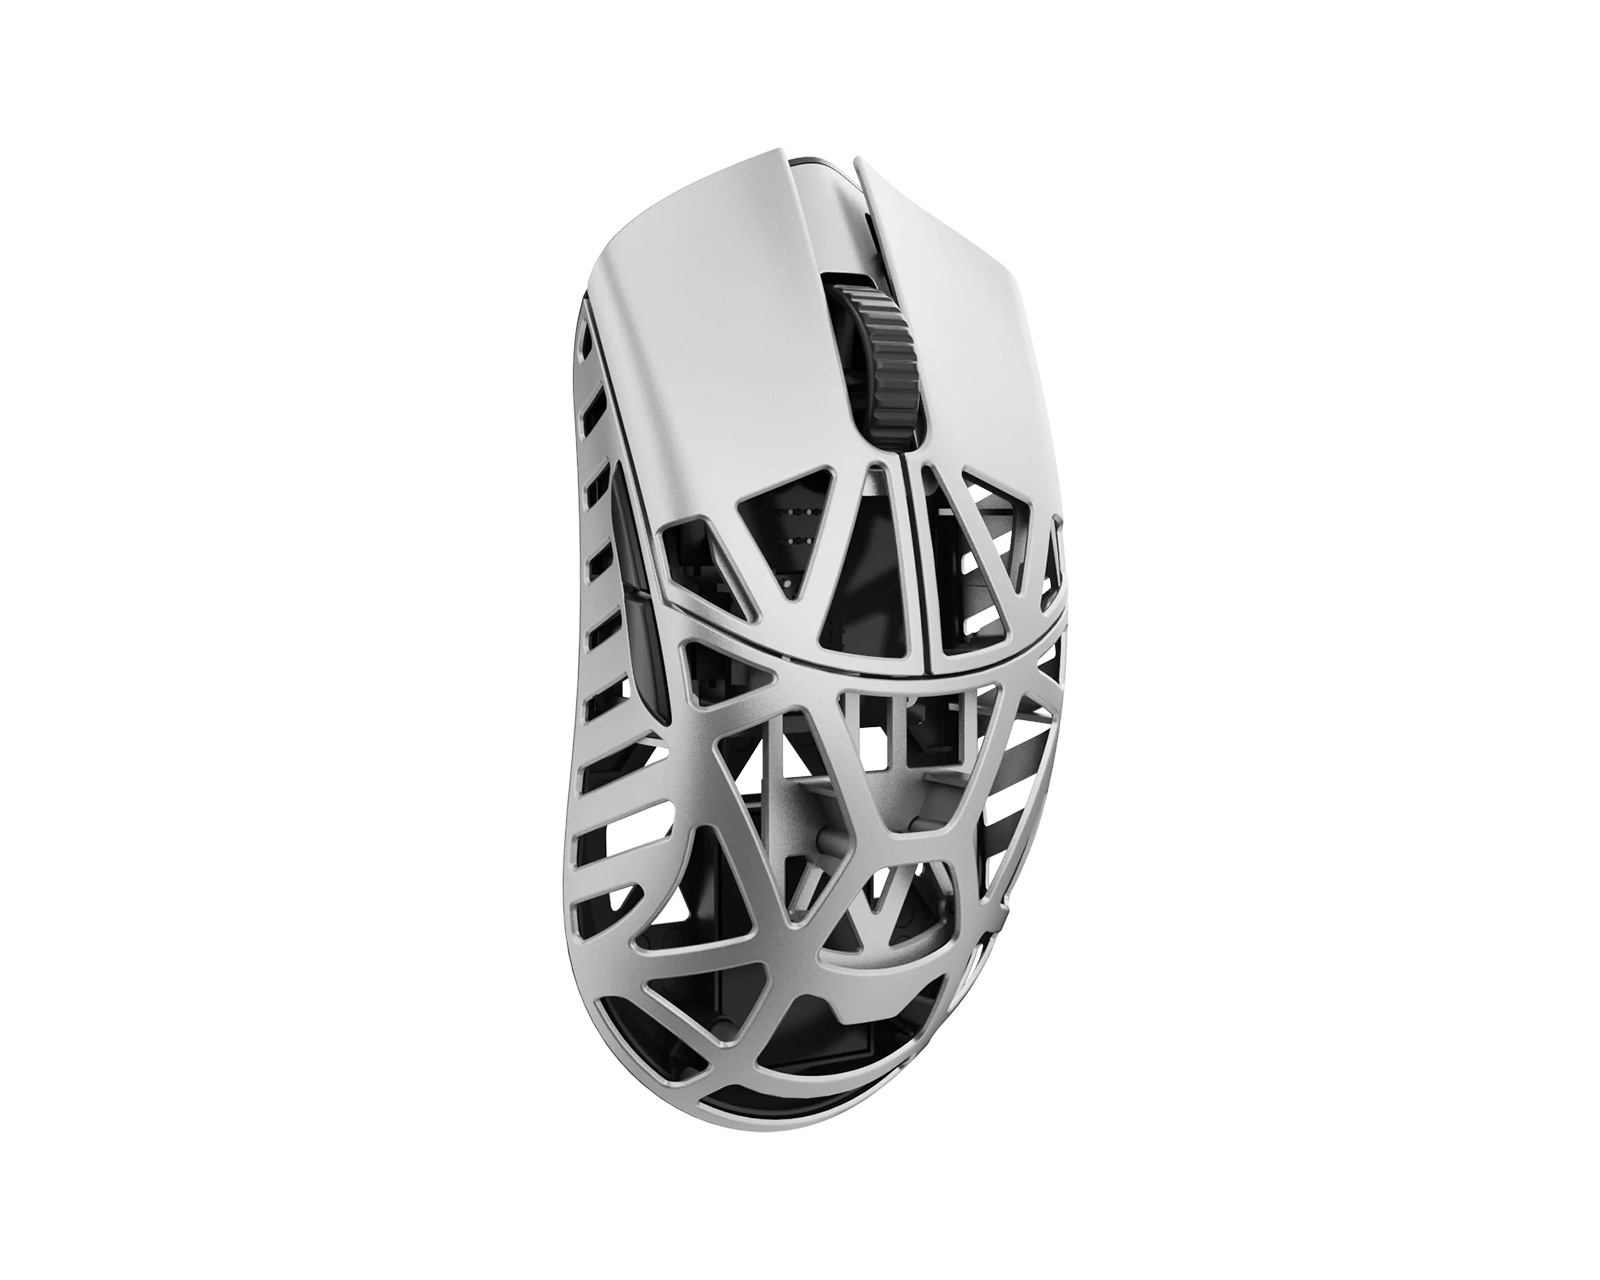 WLMouse BEAST Mini Wireless Gaming Mouse - Silver - us.MaxGaming.com